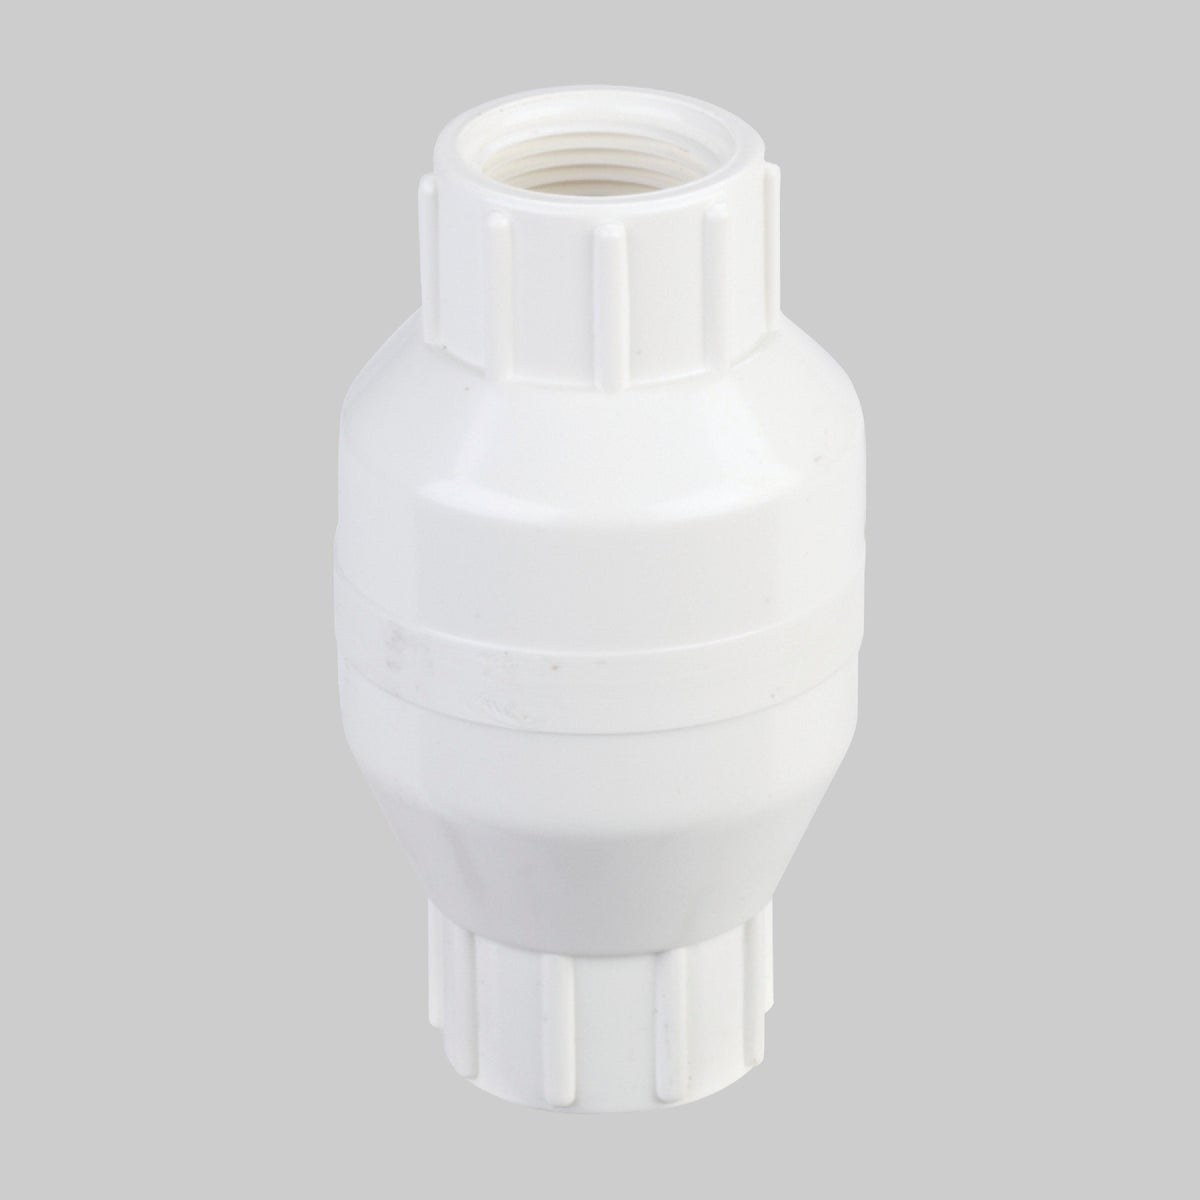 ProLine 3/4 In. PVC Schedule 40 Spring Loaded Check Valve